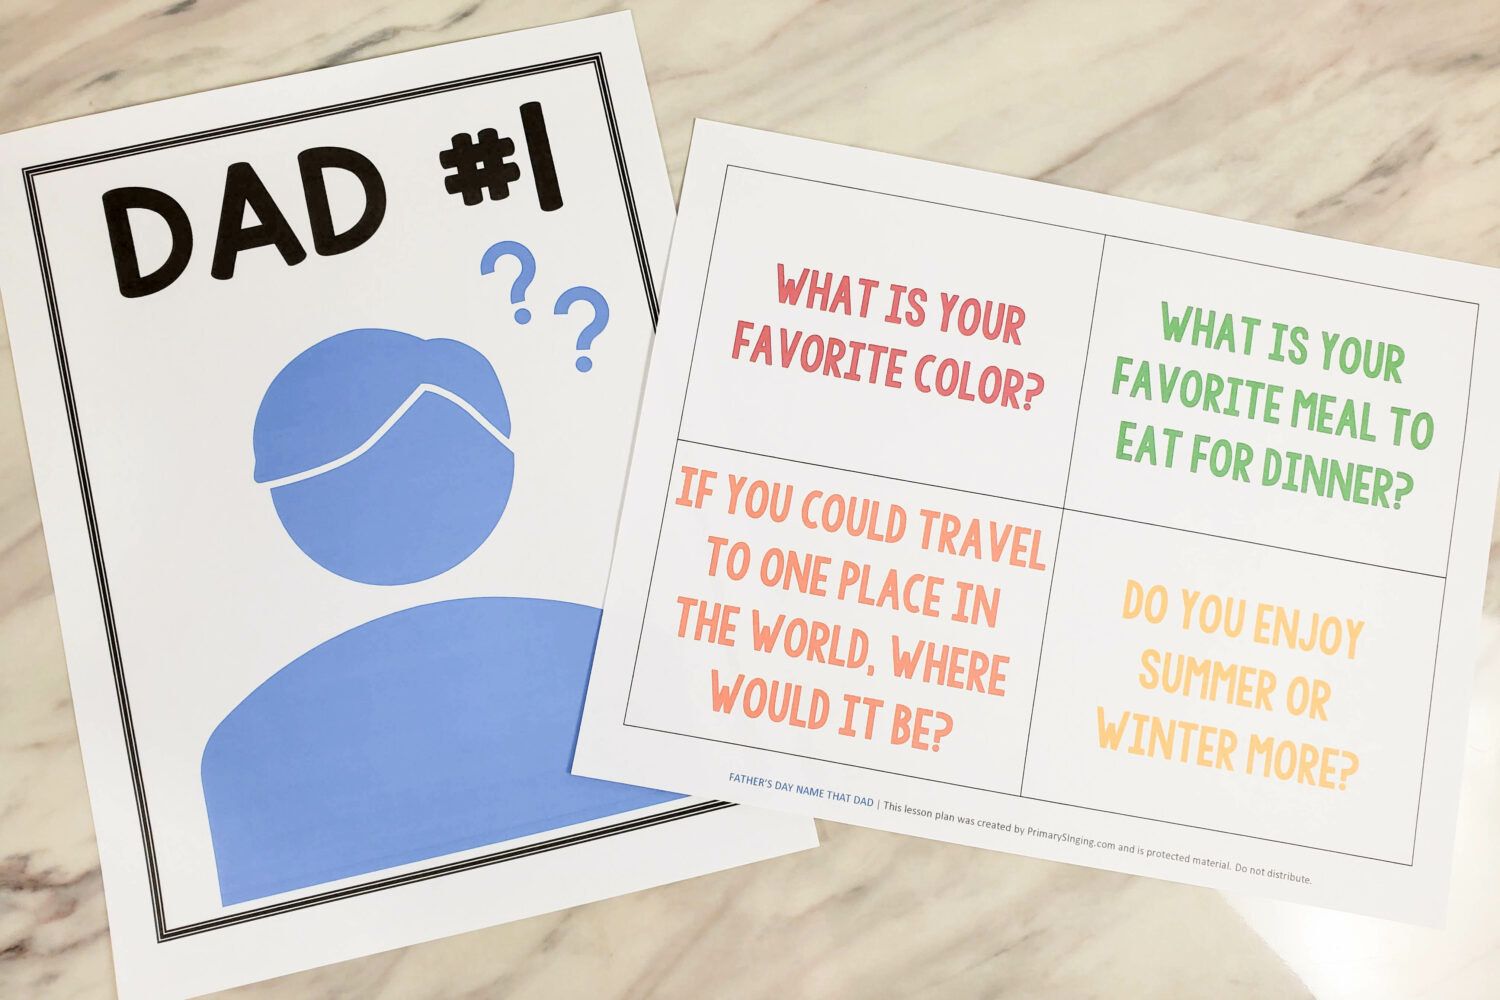 Name That Dad Father's Day singing time ideas - fun way for LDS Primary music leader to teach your choice of Father's day song while having the kids guess the hidden dads in the Primary room!